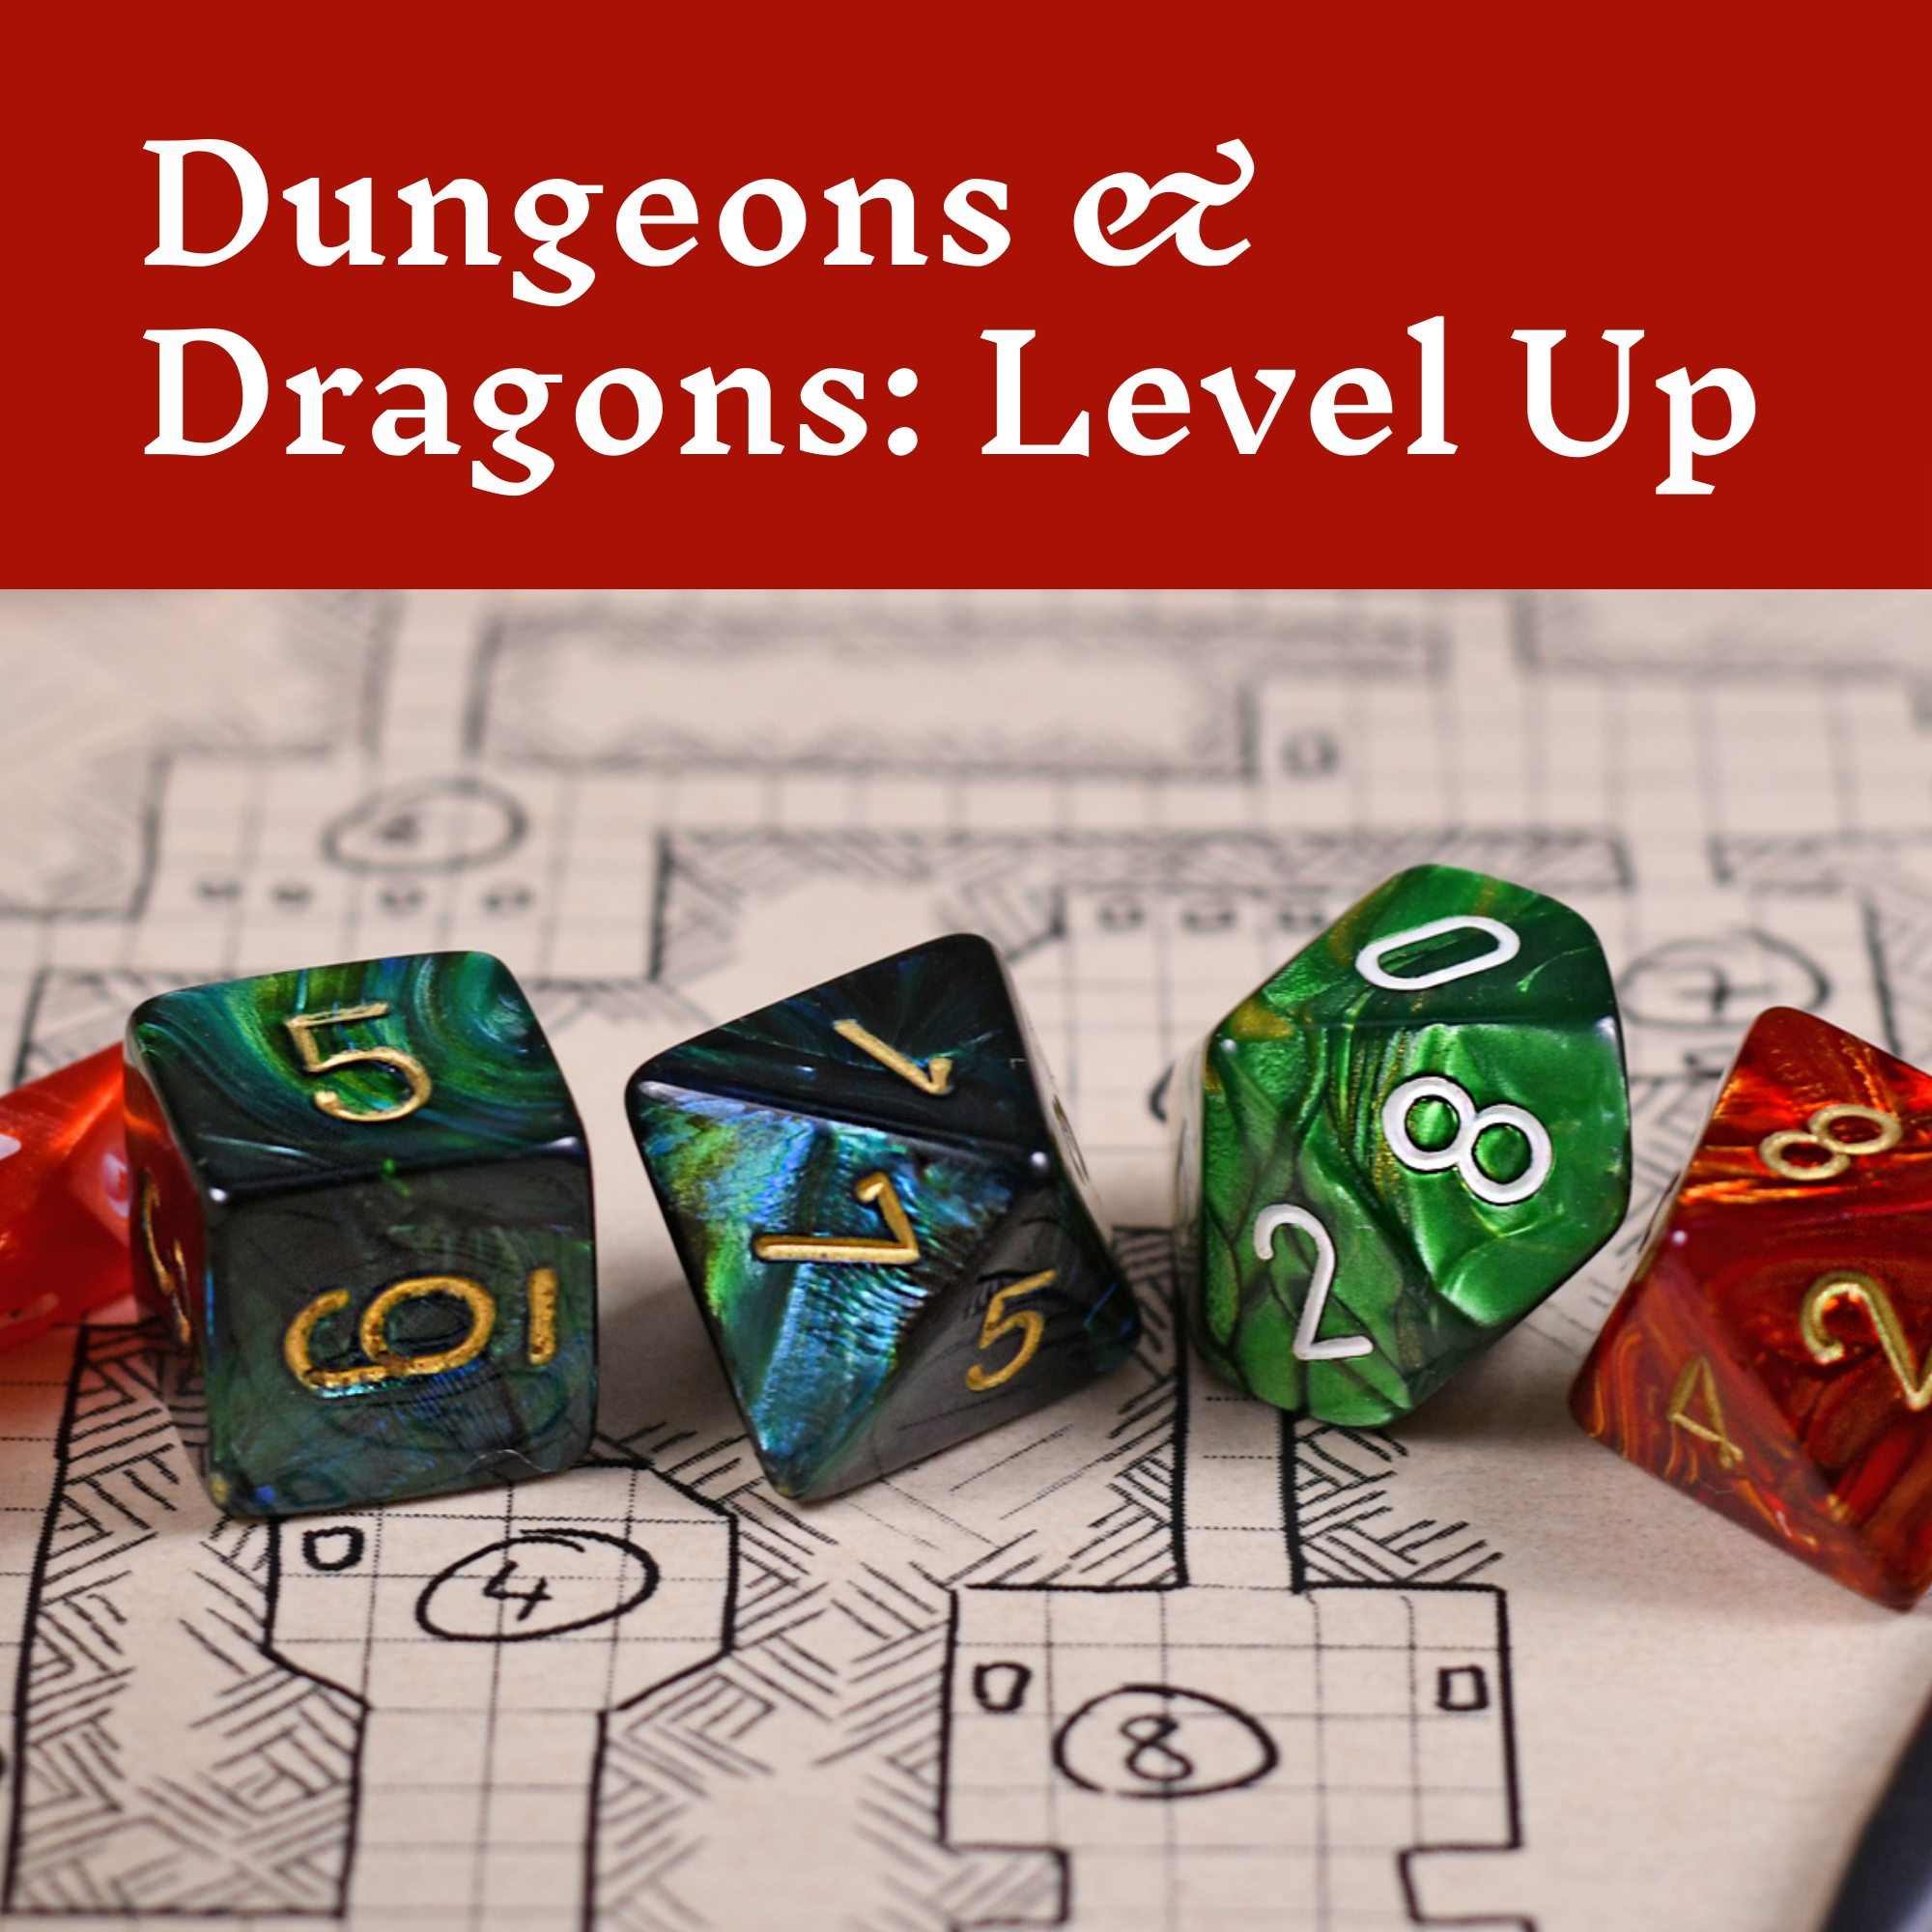 Dungeons & Dragons: Level Up